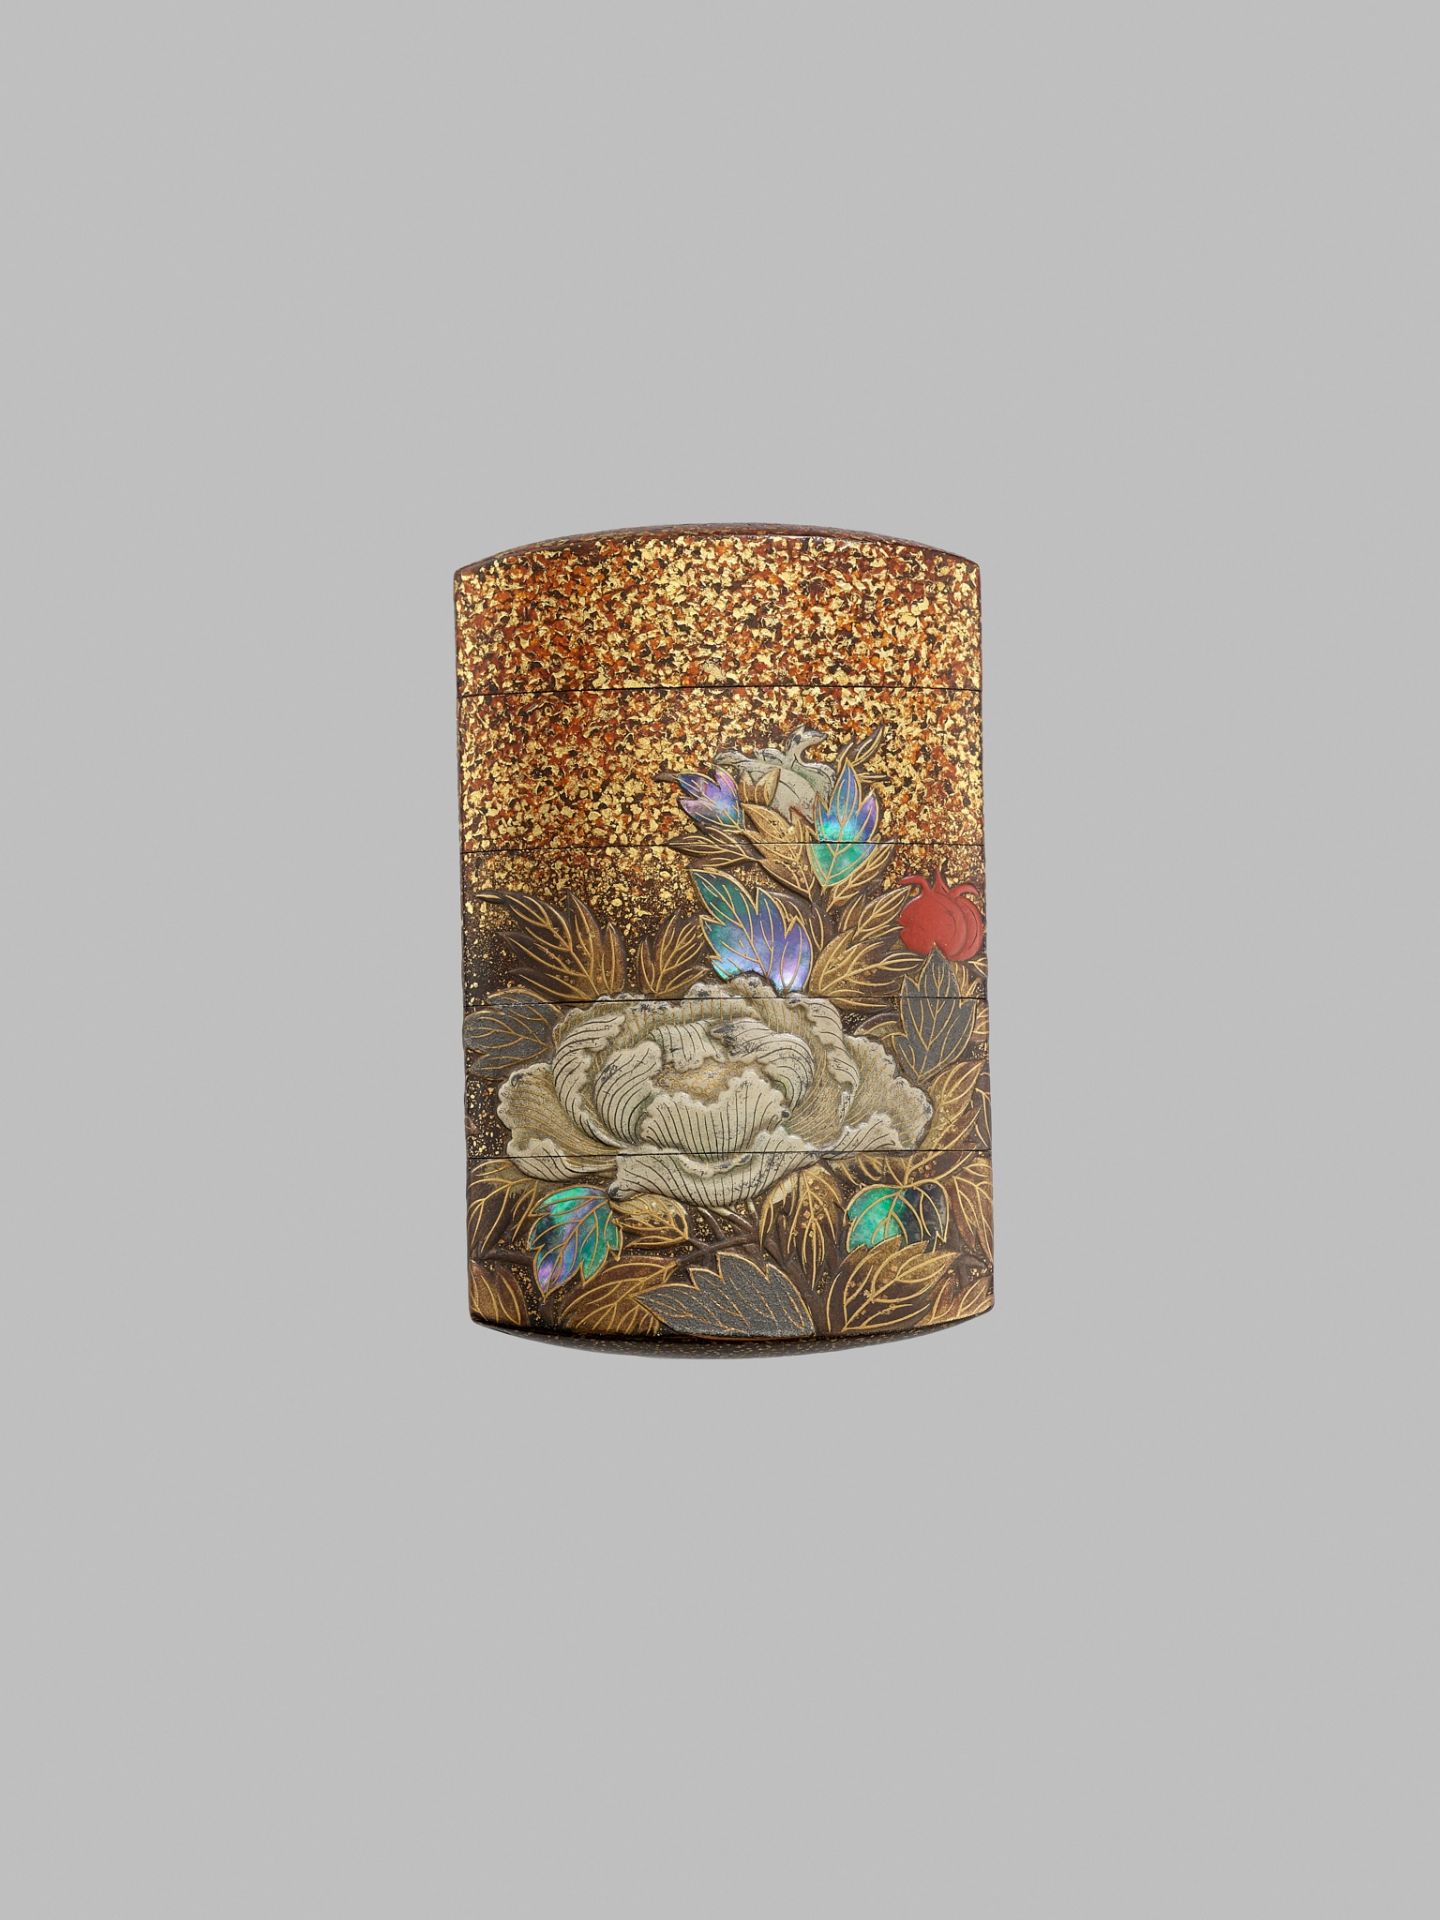 KOMA KORYU: A FINE LACQUER FOUR-CASE INRO WITH PEONIES - Image 2 of 7